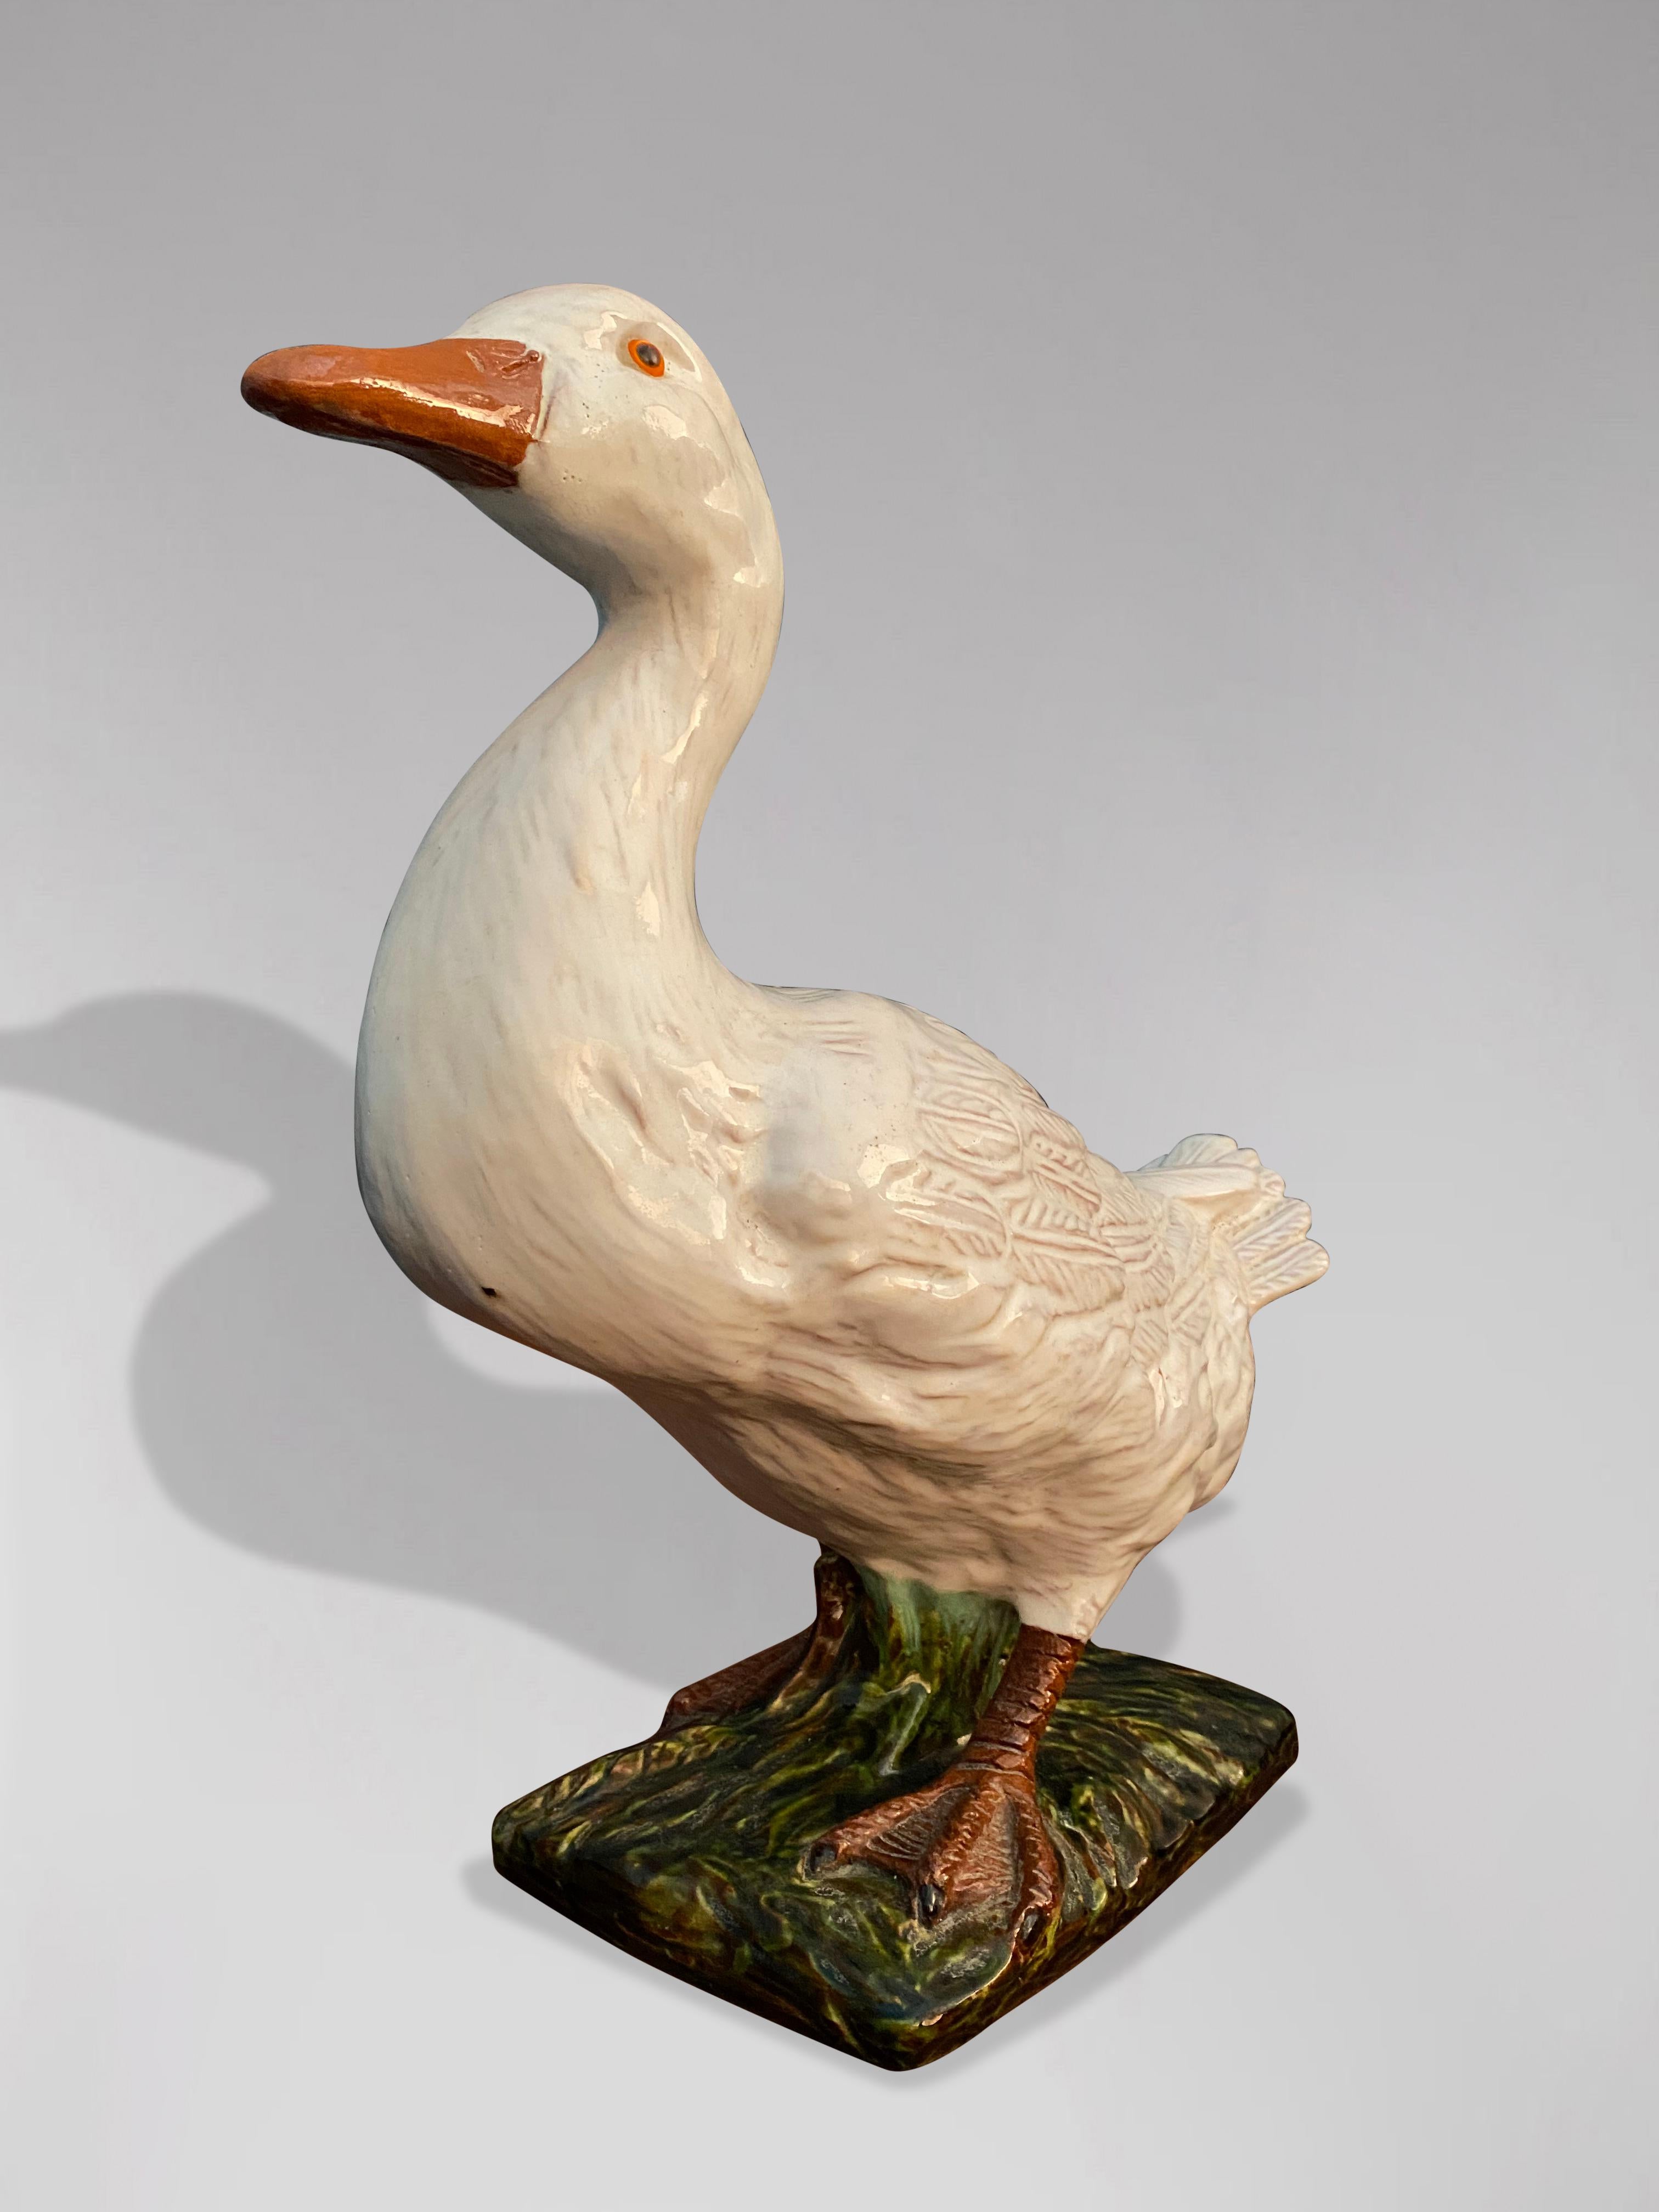 Hand-Crafted 19th Century French Earthenware Duck Sculpture from Bavent in Normandy